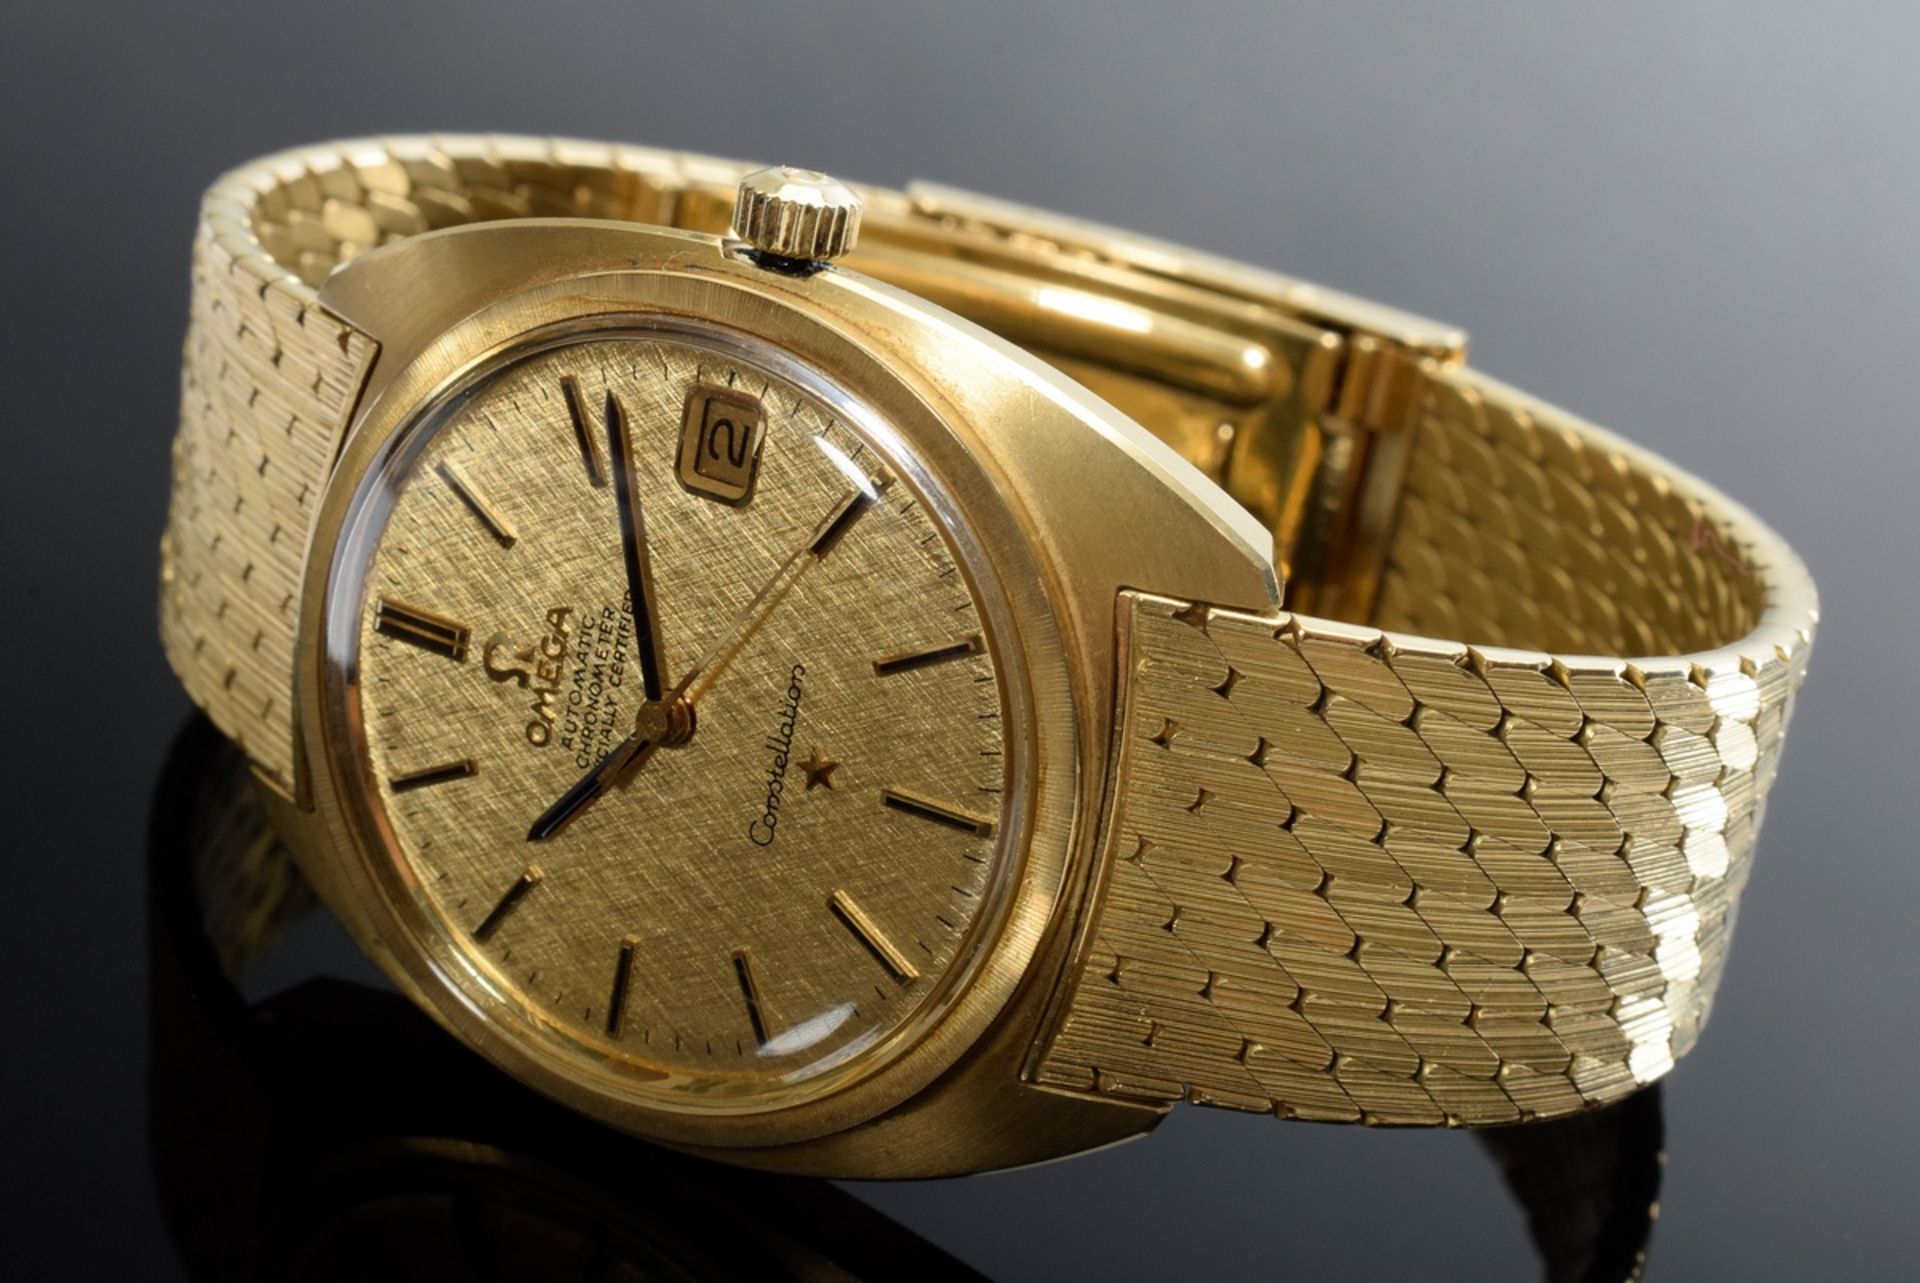 Omega GG 750 "Constellation" GG 750 men's wristwatch, chronometer, automatic, mineral glass, bracel - Image 2 of 4